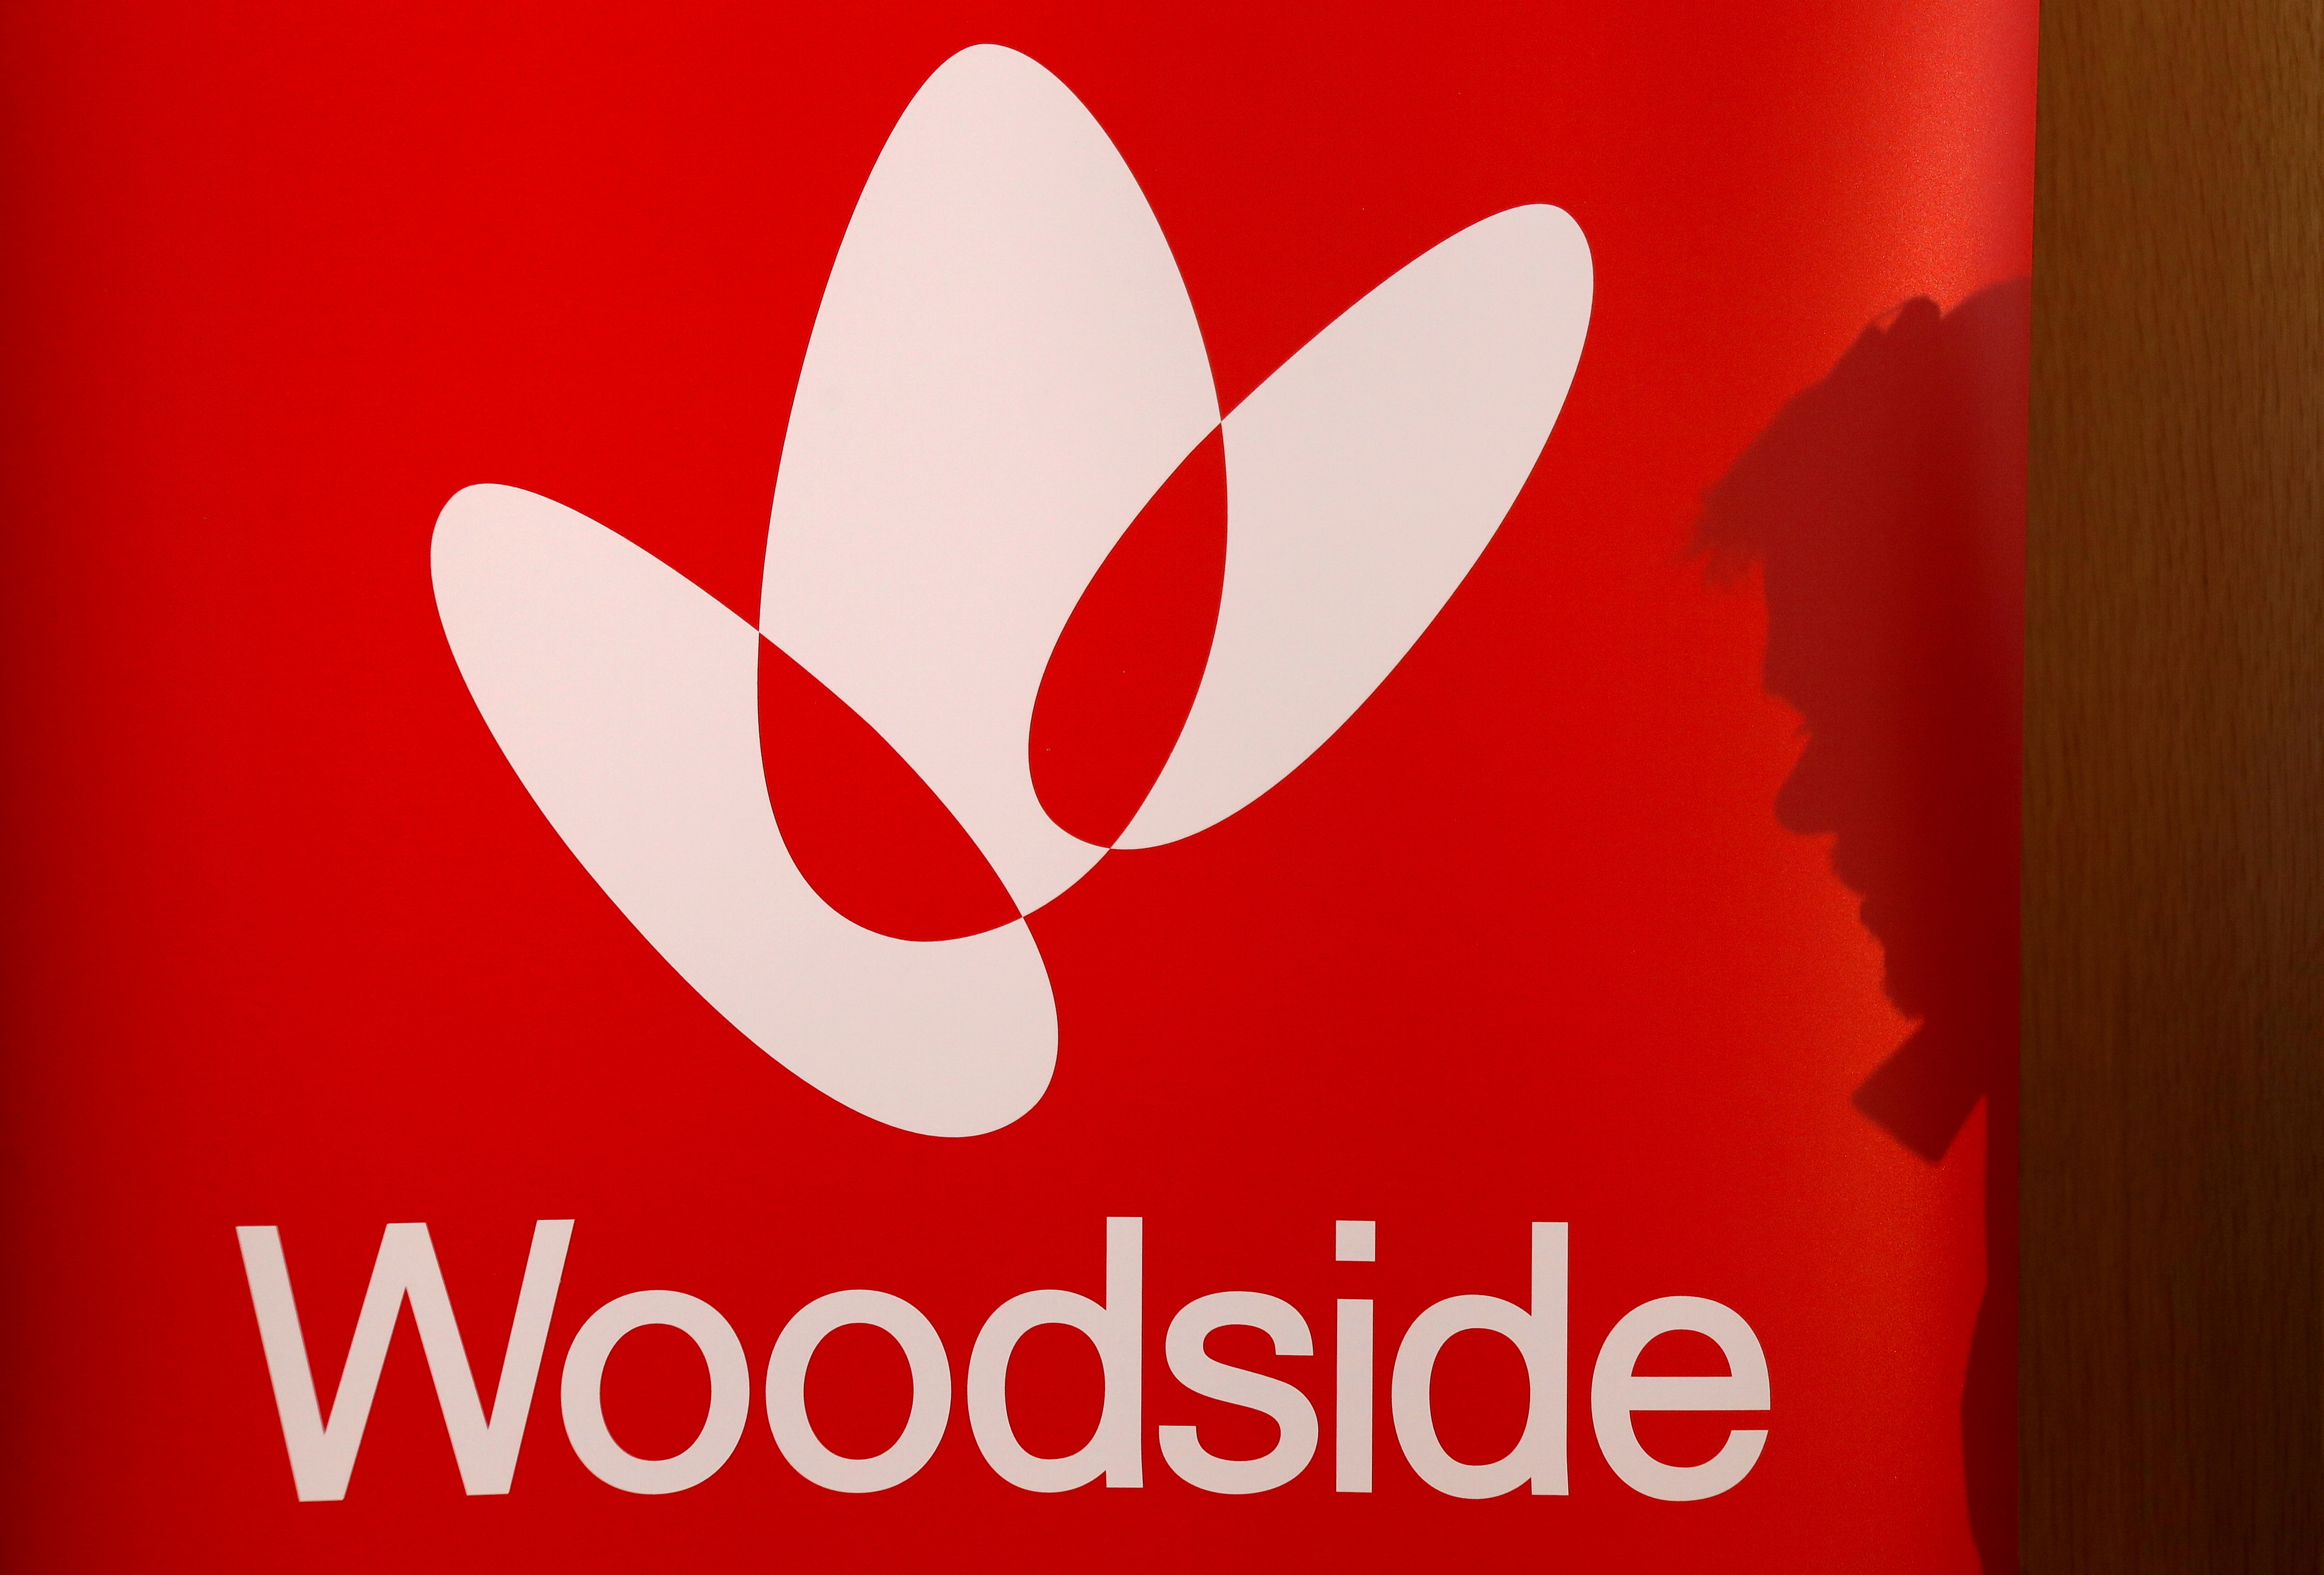 The shadow of a man is cast onto a poster displaying the logo for Australia's Woodside Petroleum